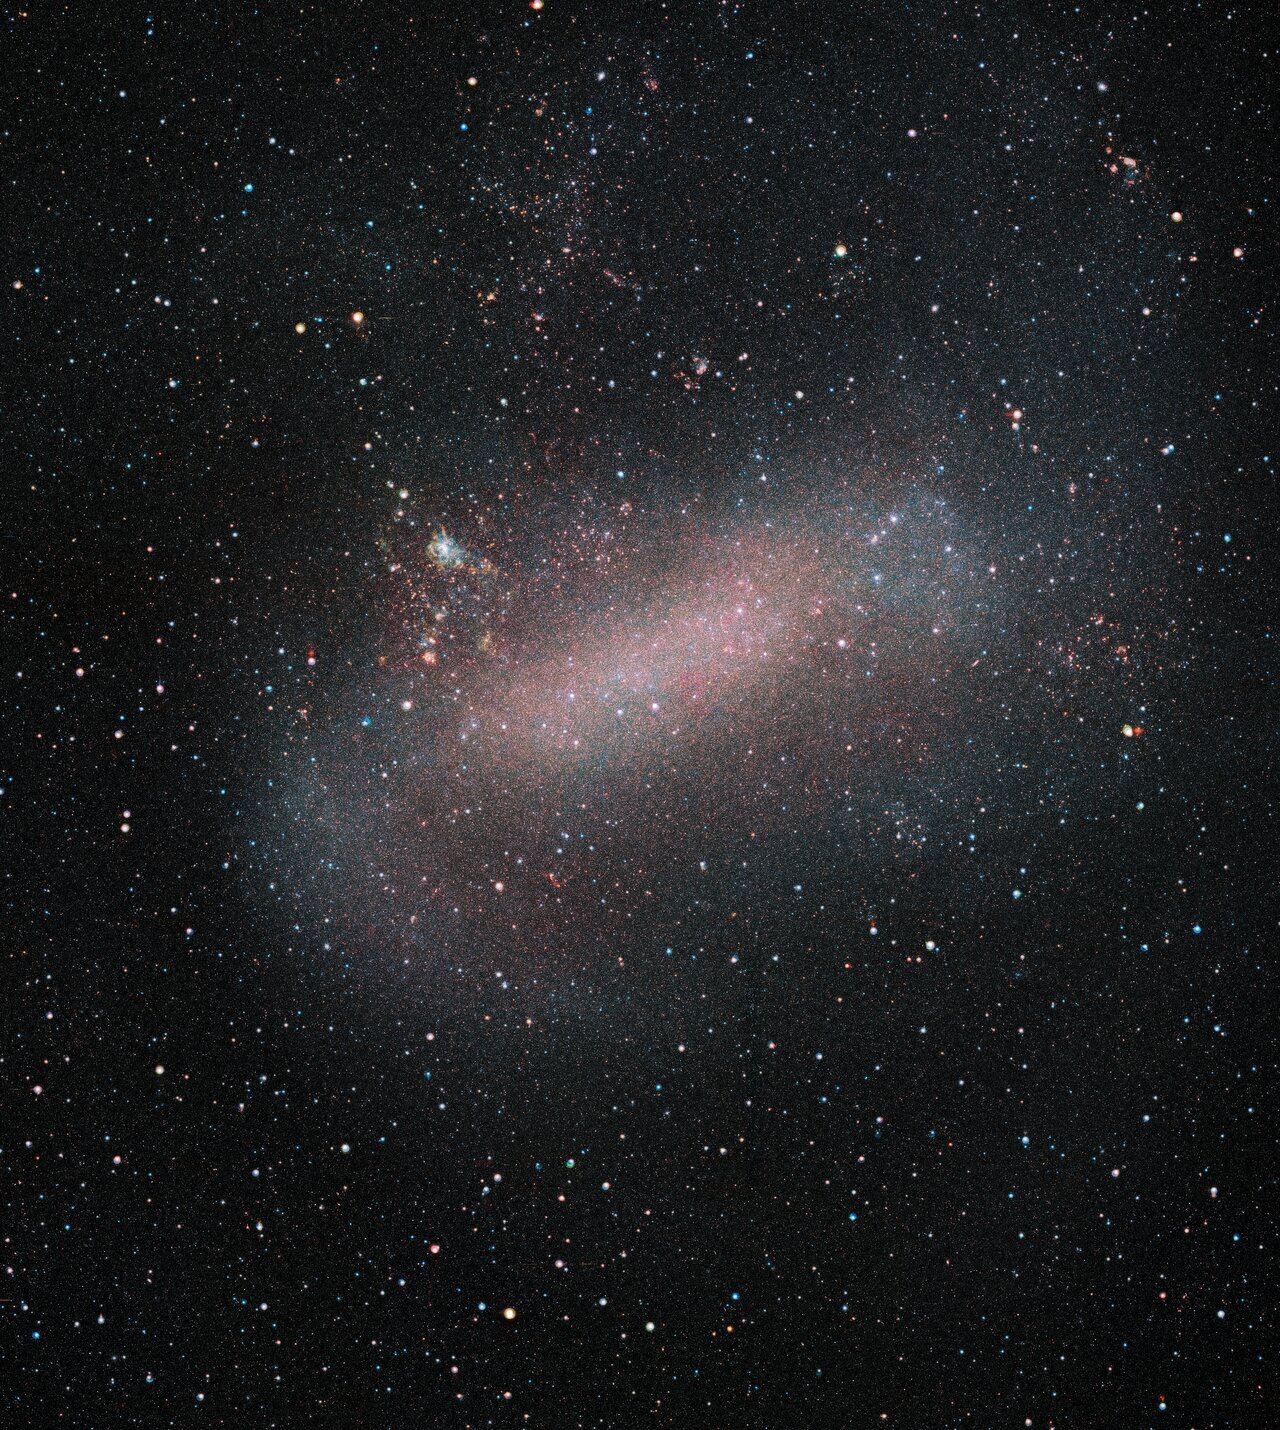 The Large Magellanic Cloud revealed by VISTA, one of our nearest galactic neighbours. VISTA has been surveying this galaxy and its sibling the Small Magellanic Cloud, as well as their surroundings, in unprecedented detail. This survey allows astronomers to observe a large number of stars, opening up new opportunities to study stellar evolution, galactic dynamics, and variable stars.